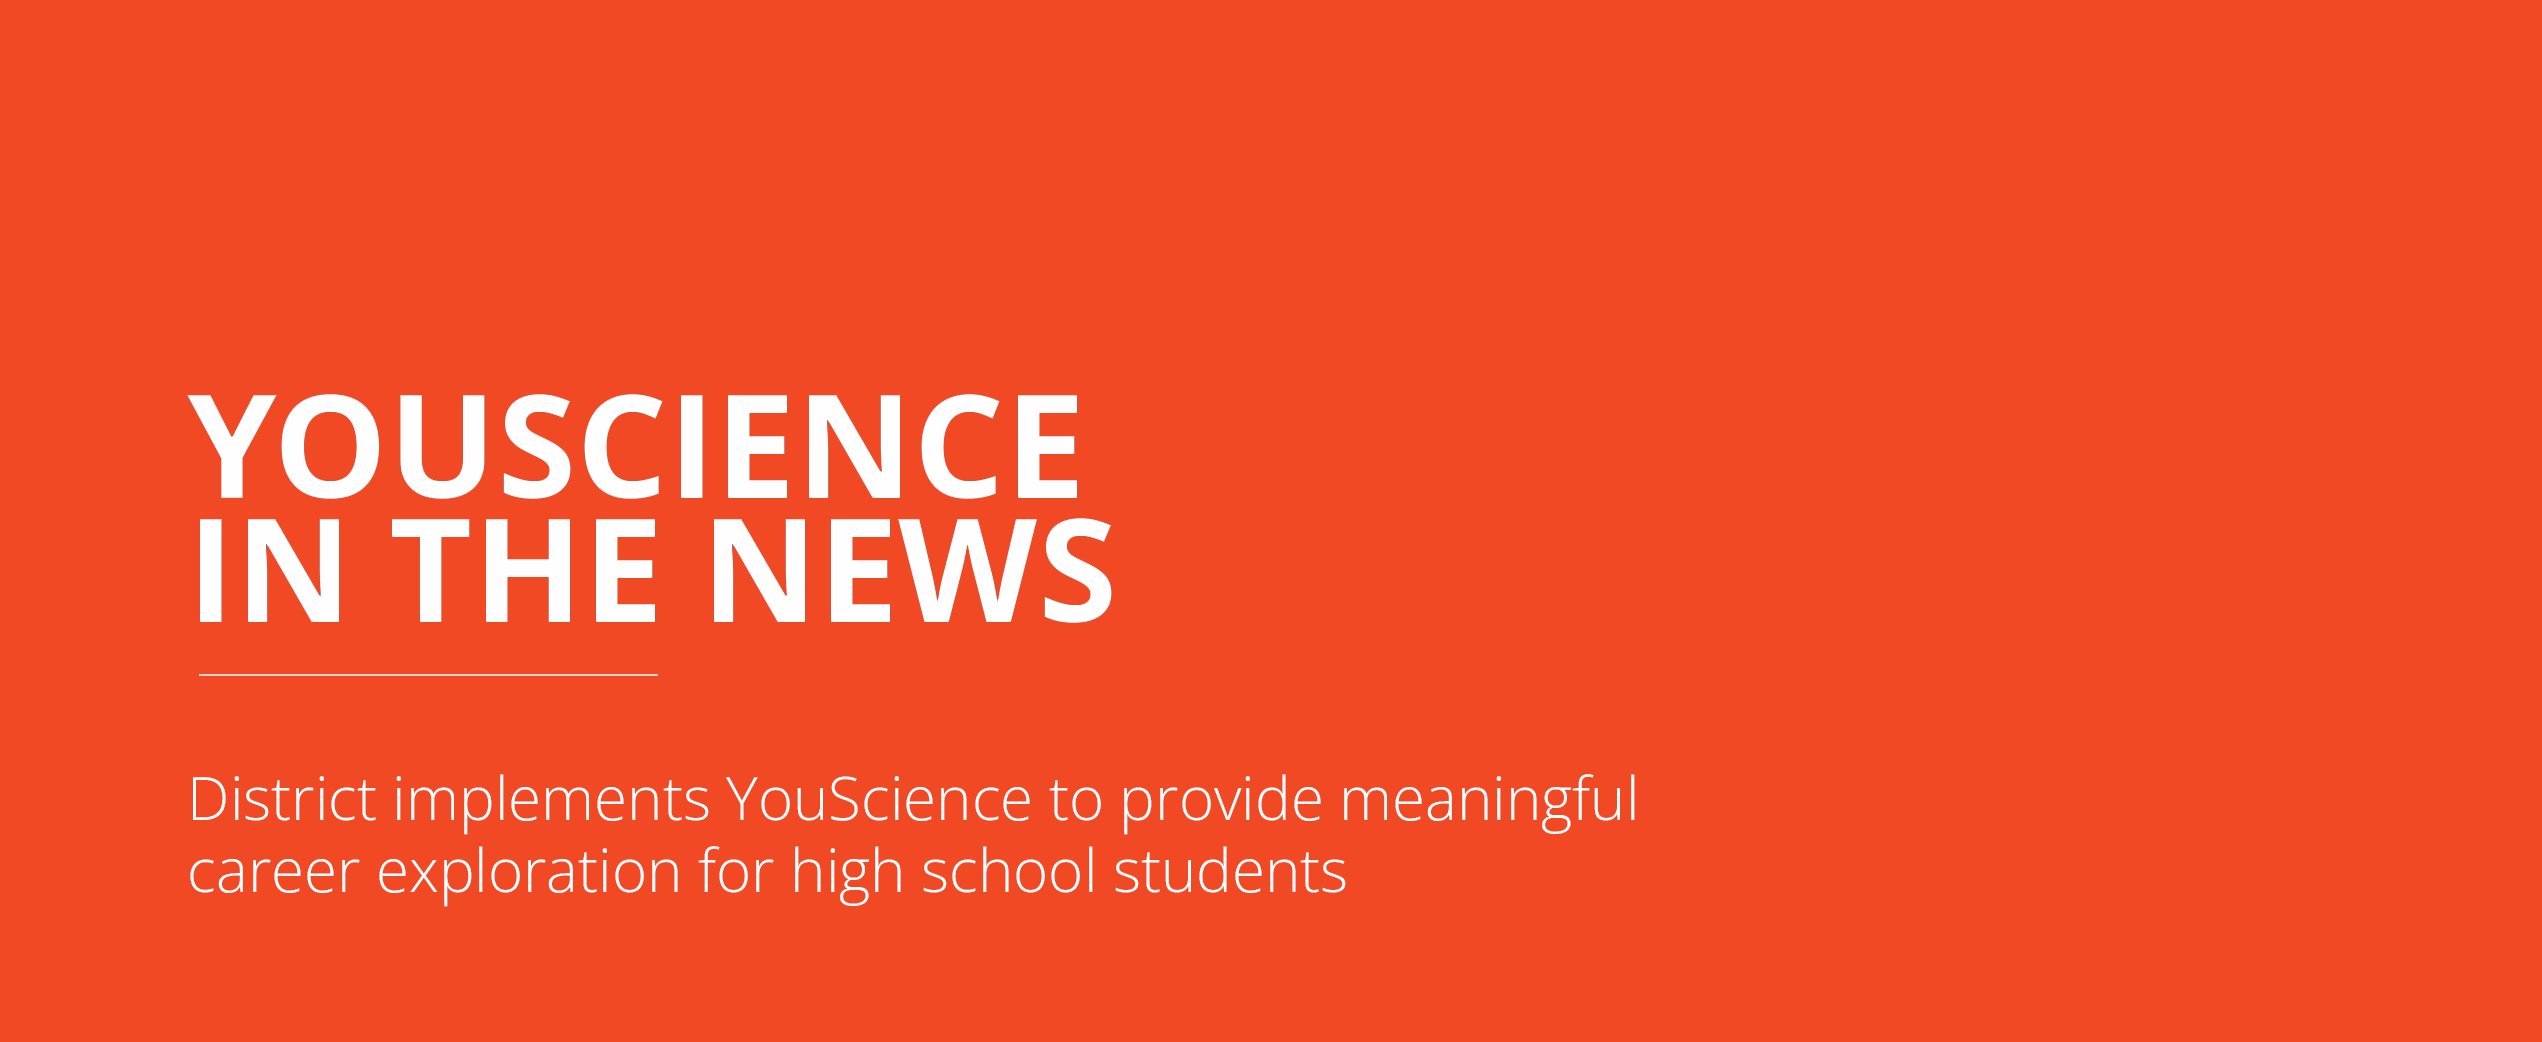 District implements YouScience to provide meaningful career exploration for high school students